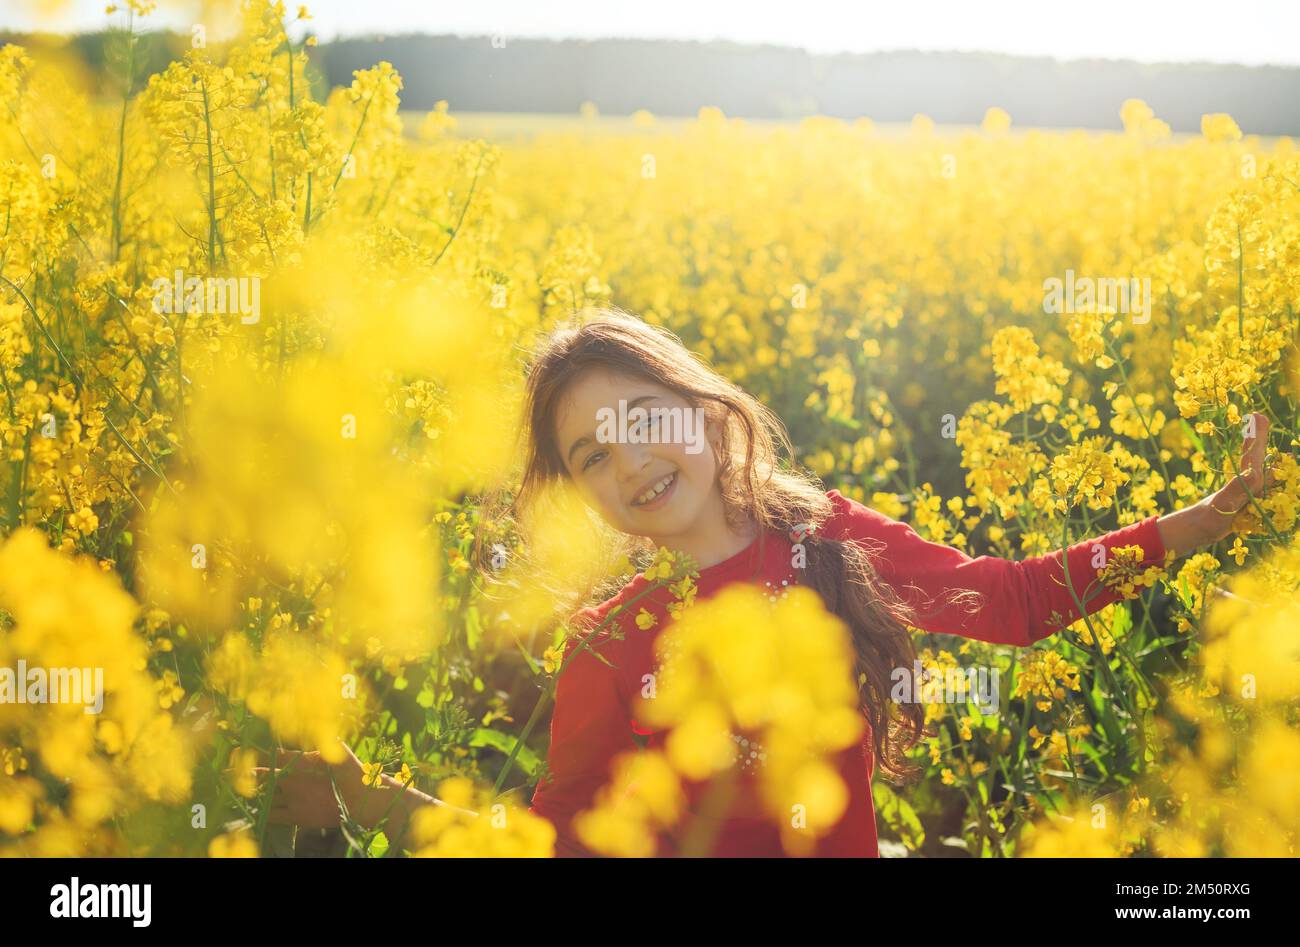 Cute little girl playing with yellow flowers in summer field. Happy child outdoors Stock Photo